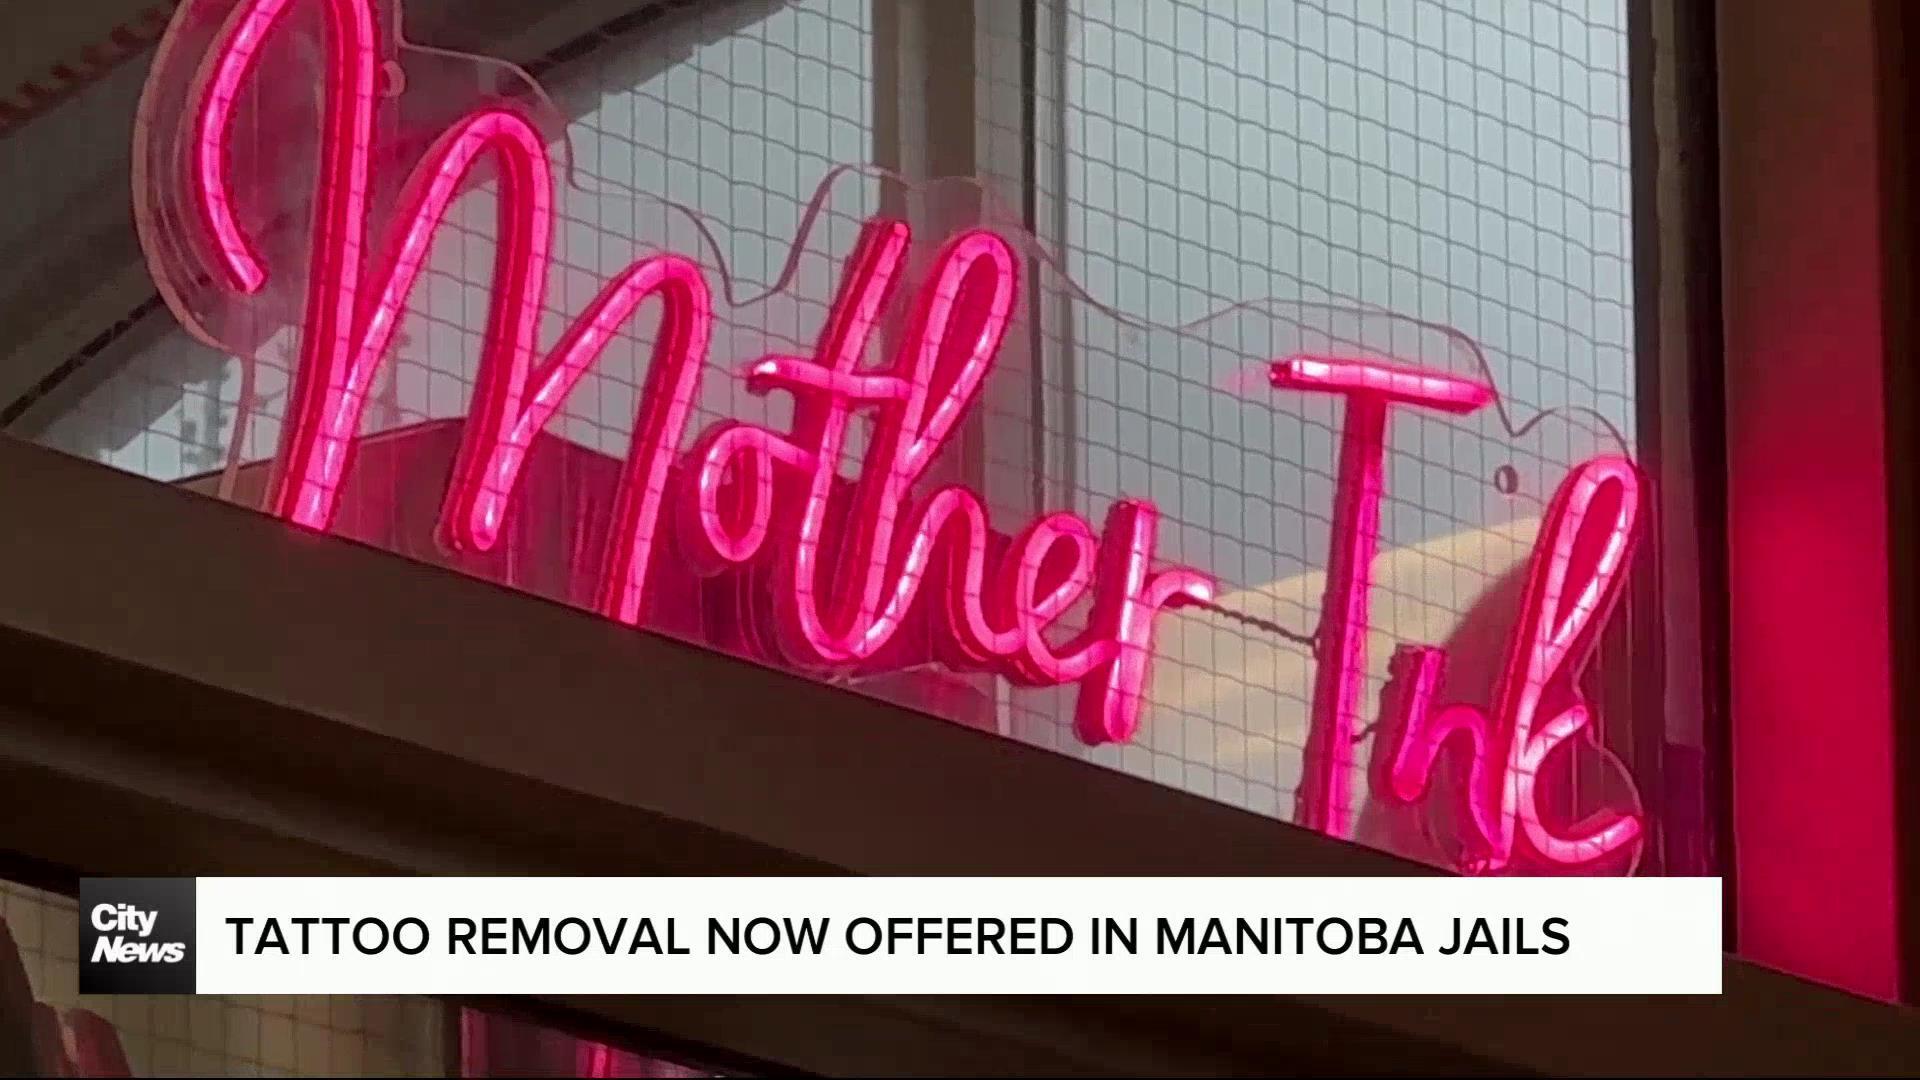 Tattoo removals being offered in Manitoba’s largest provincial jail